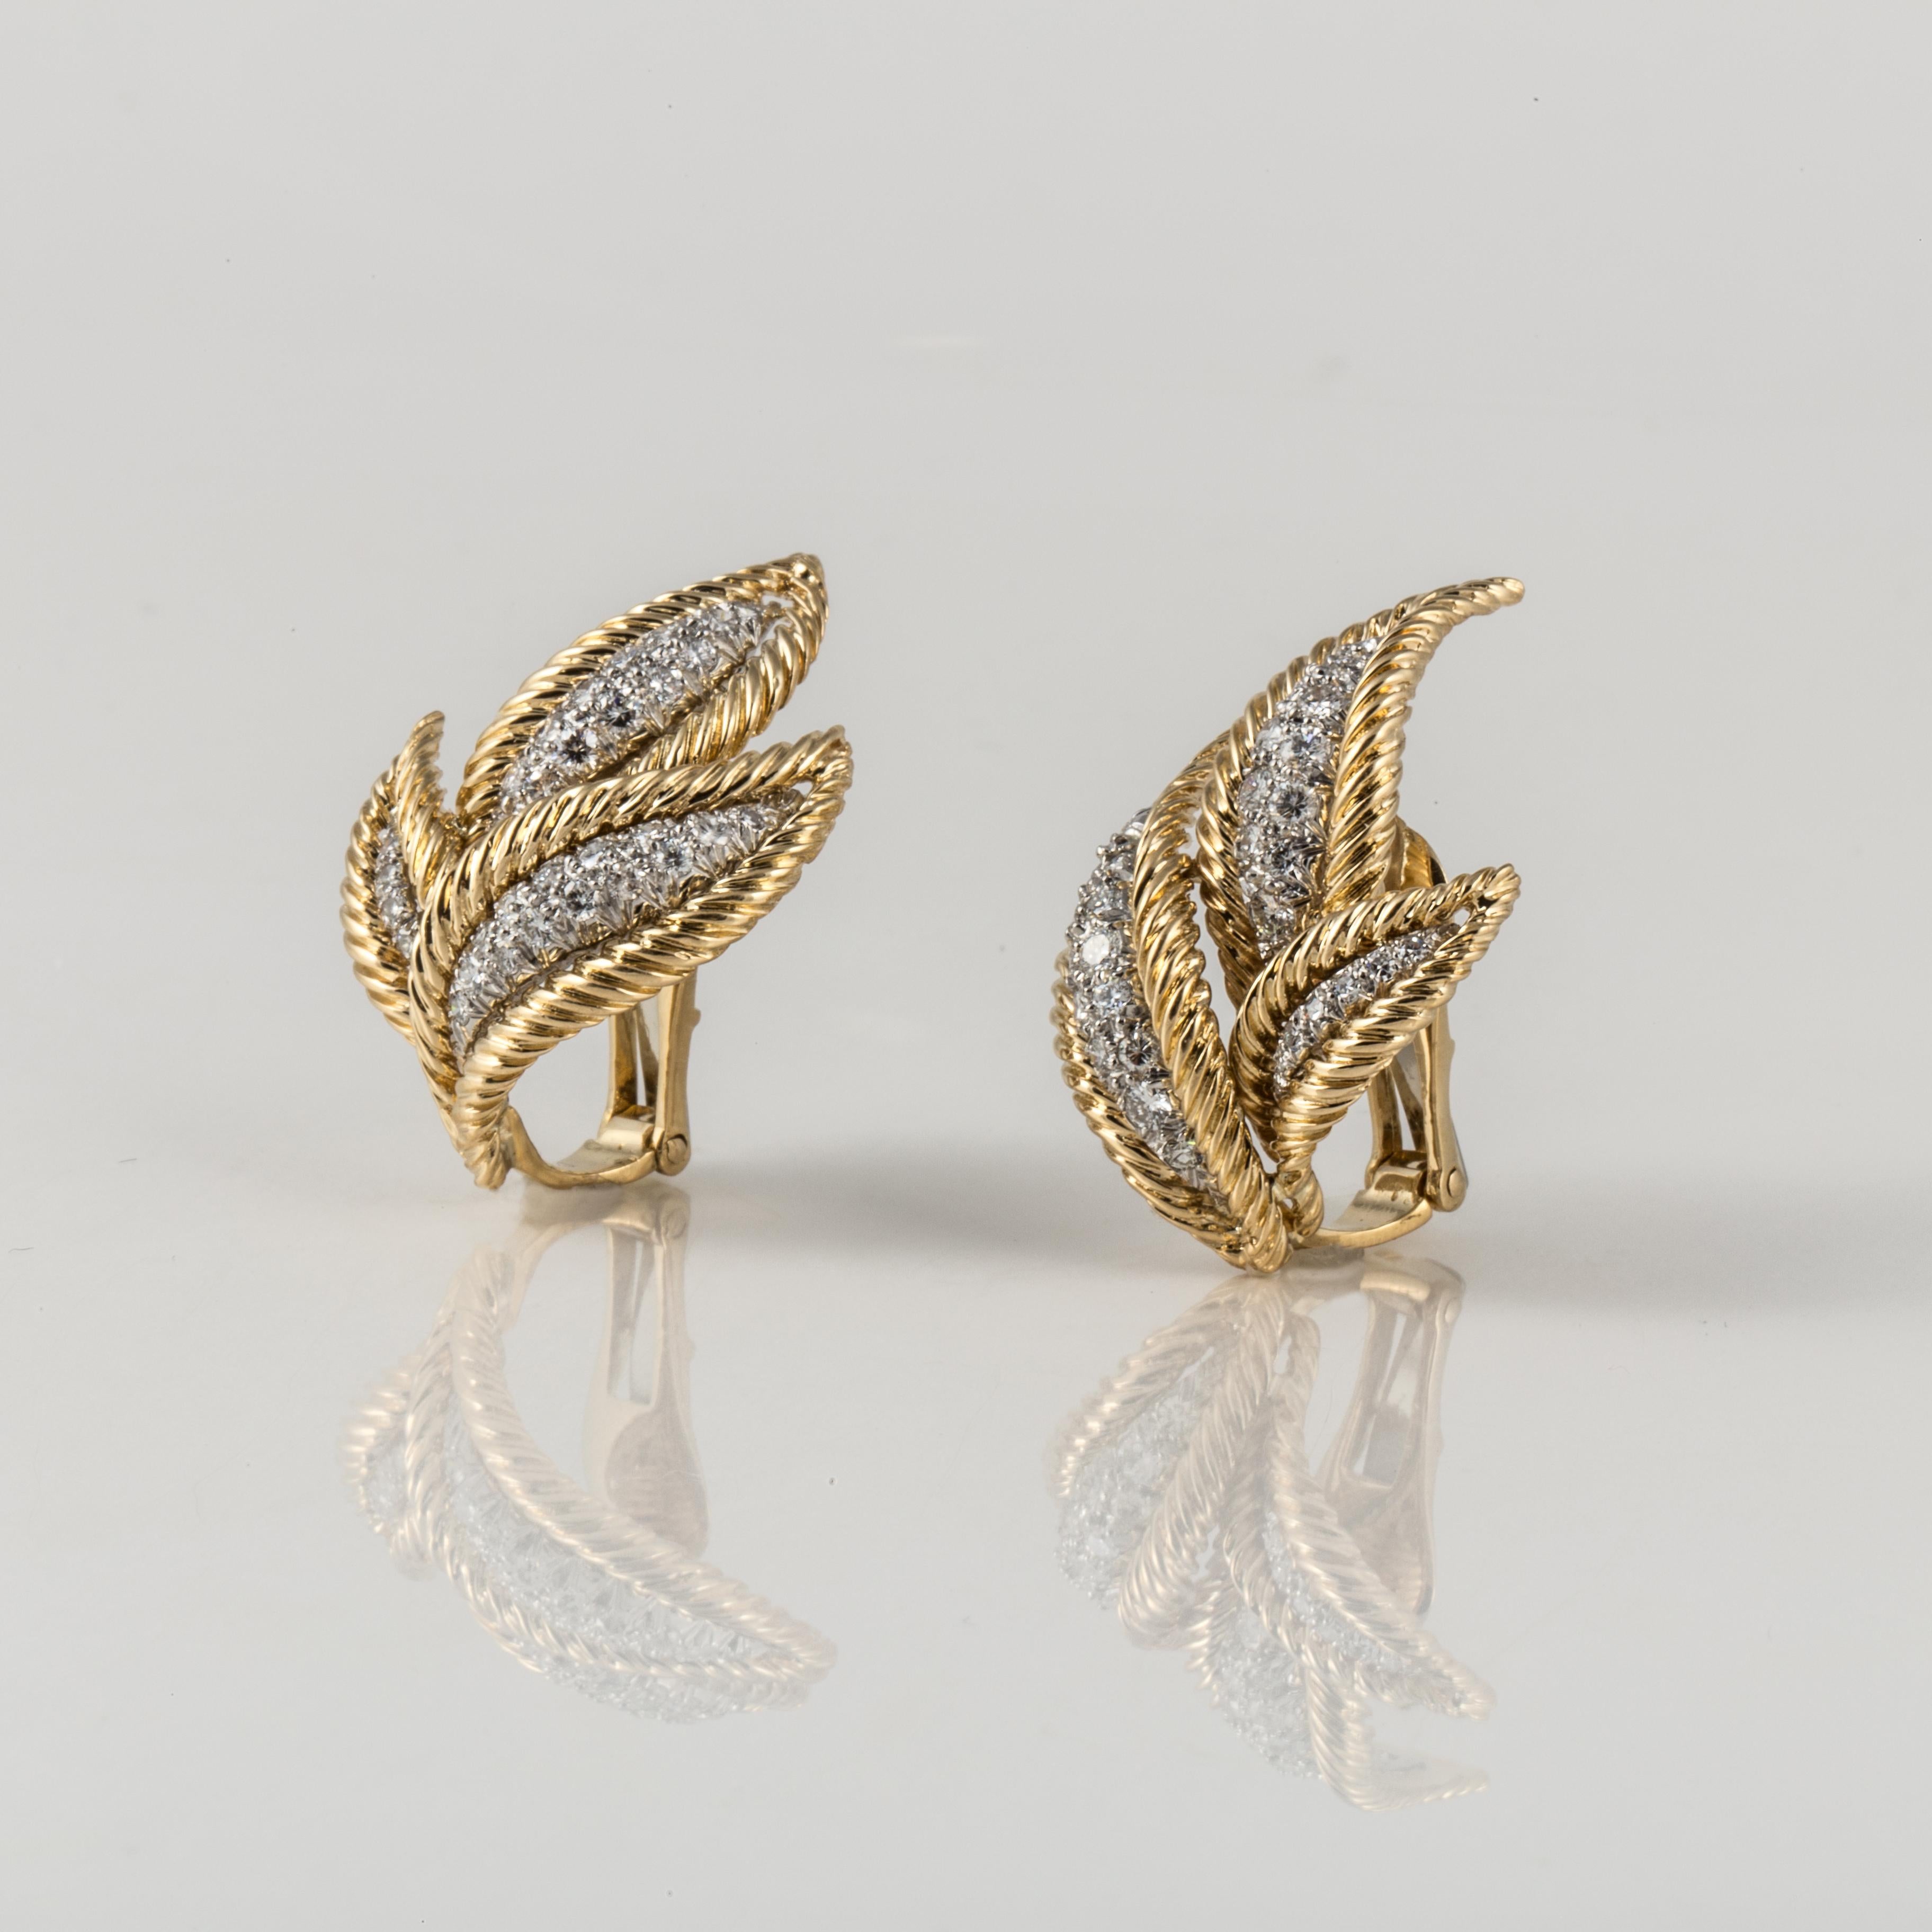 David Webb earrings composed of 18K yellow gold and platinum with diamonds.  Leaf design set with seventy (70) round diamonds that total 2.10 carats; G-H color and VVS2-VS1 clarity.  Measure 1 1/2 inches long and 1 inch wide.  Clip style.